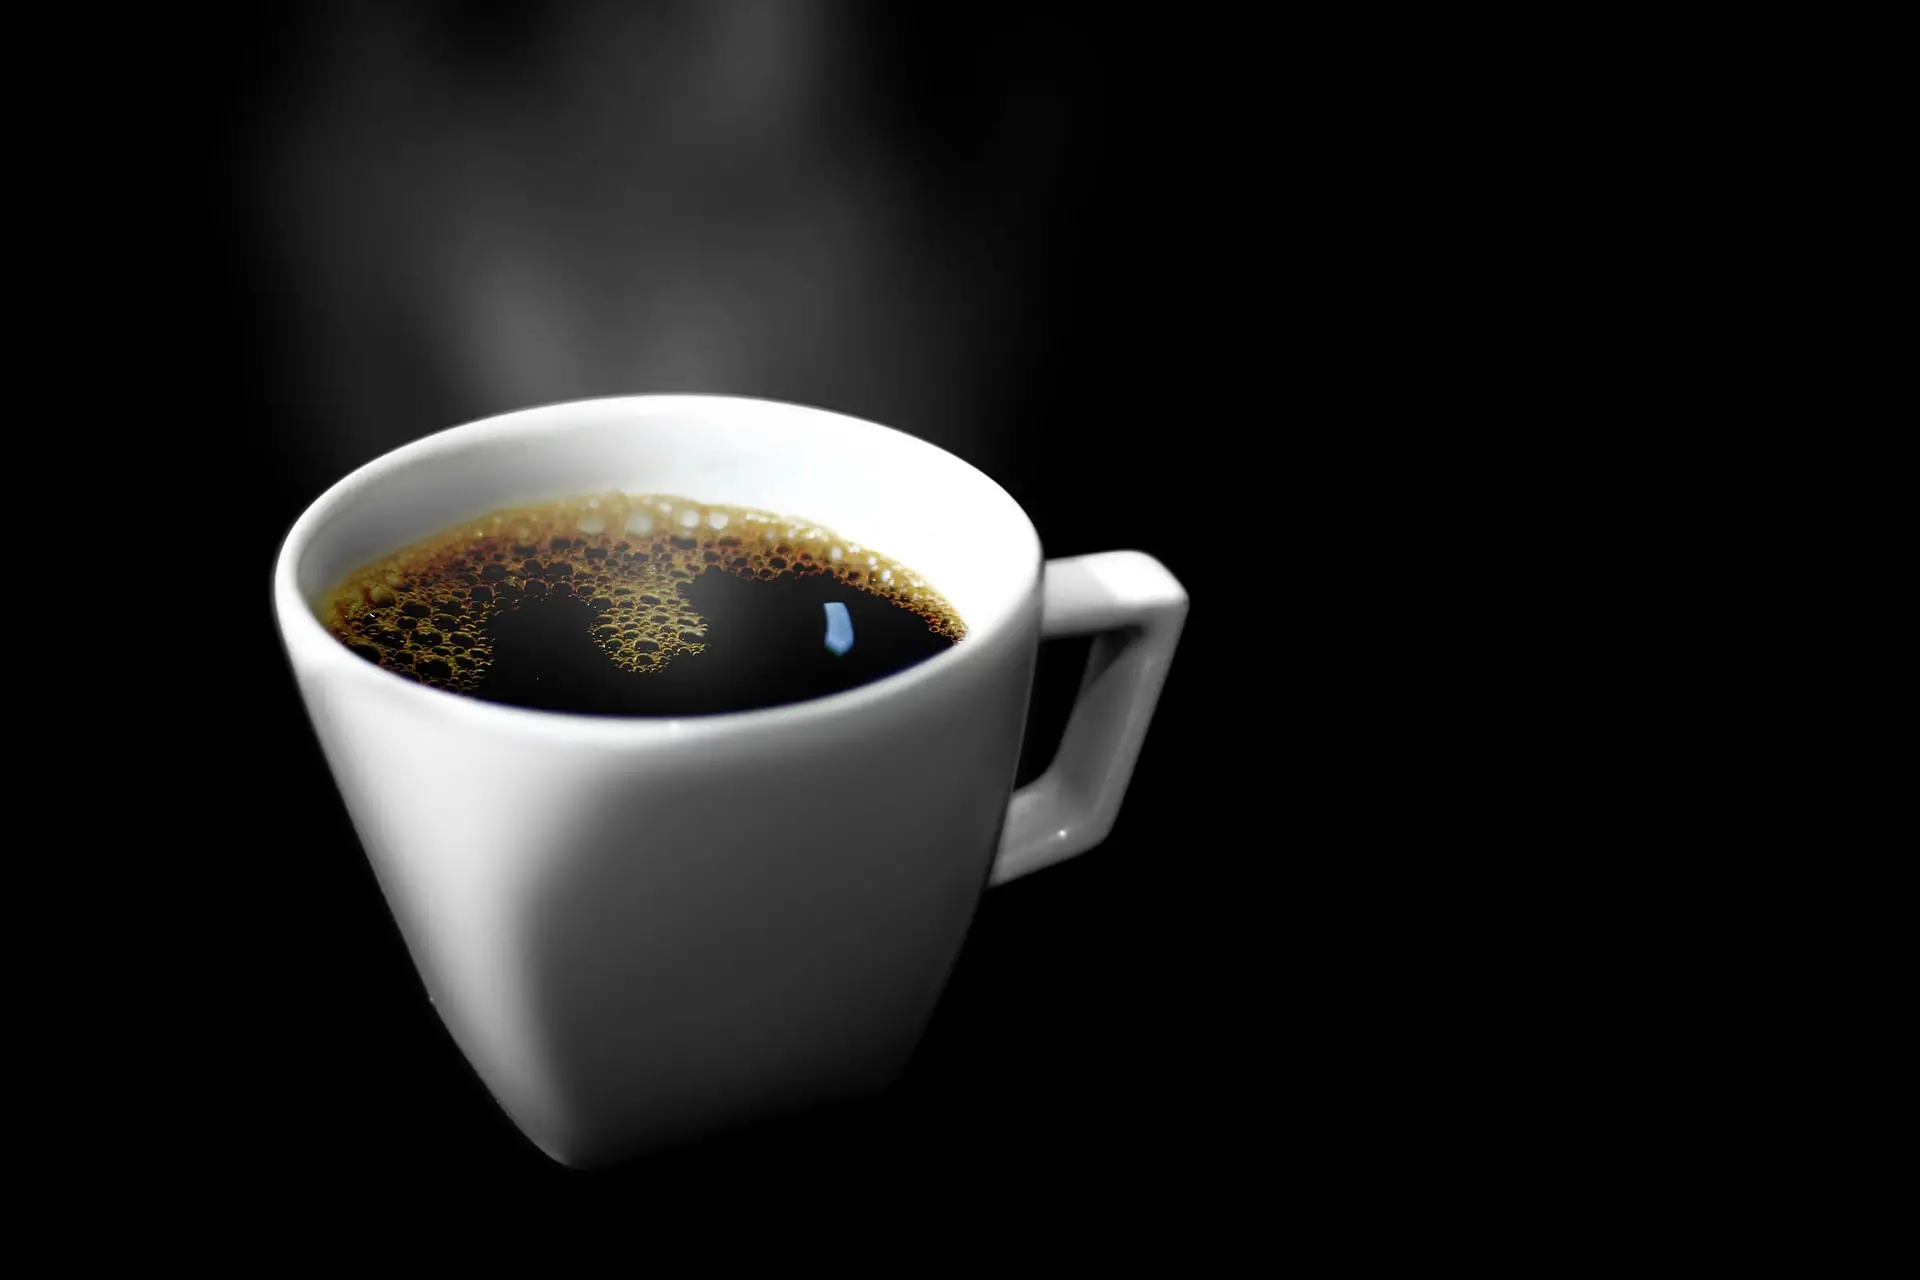 A cup of organic decaf instant coffee with black background.